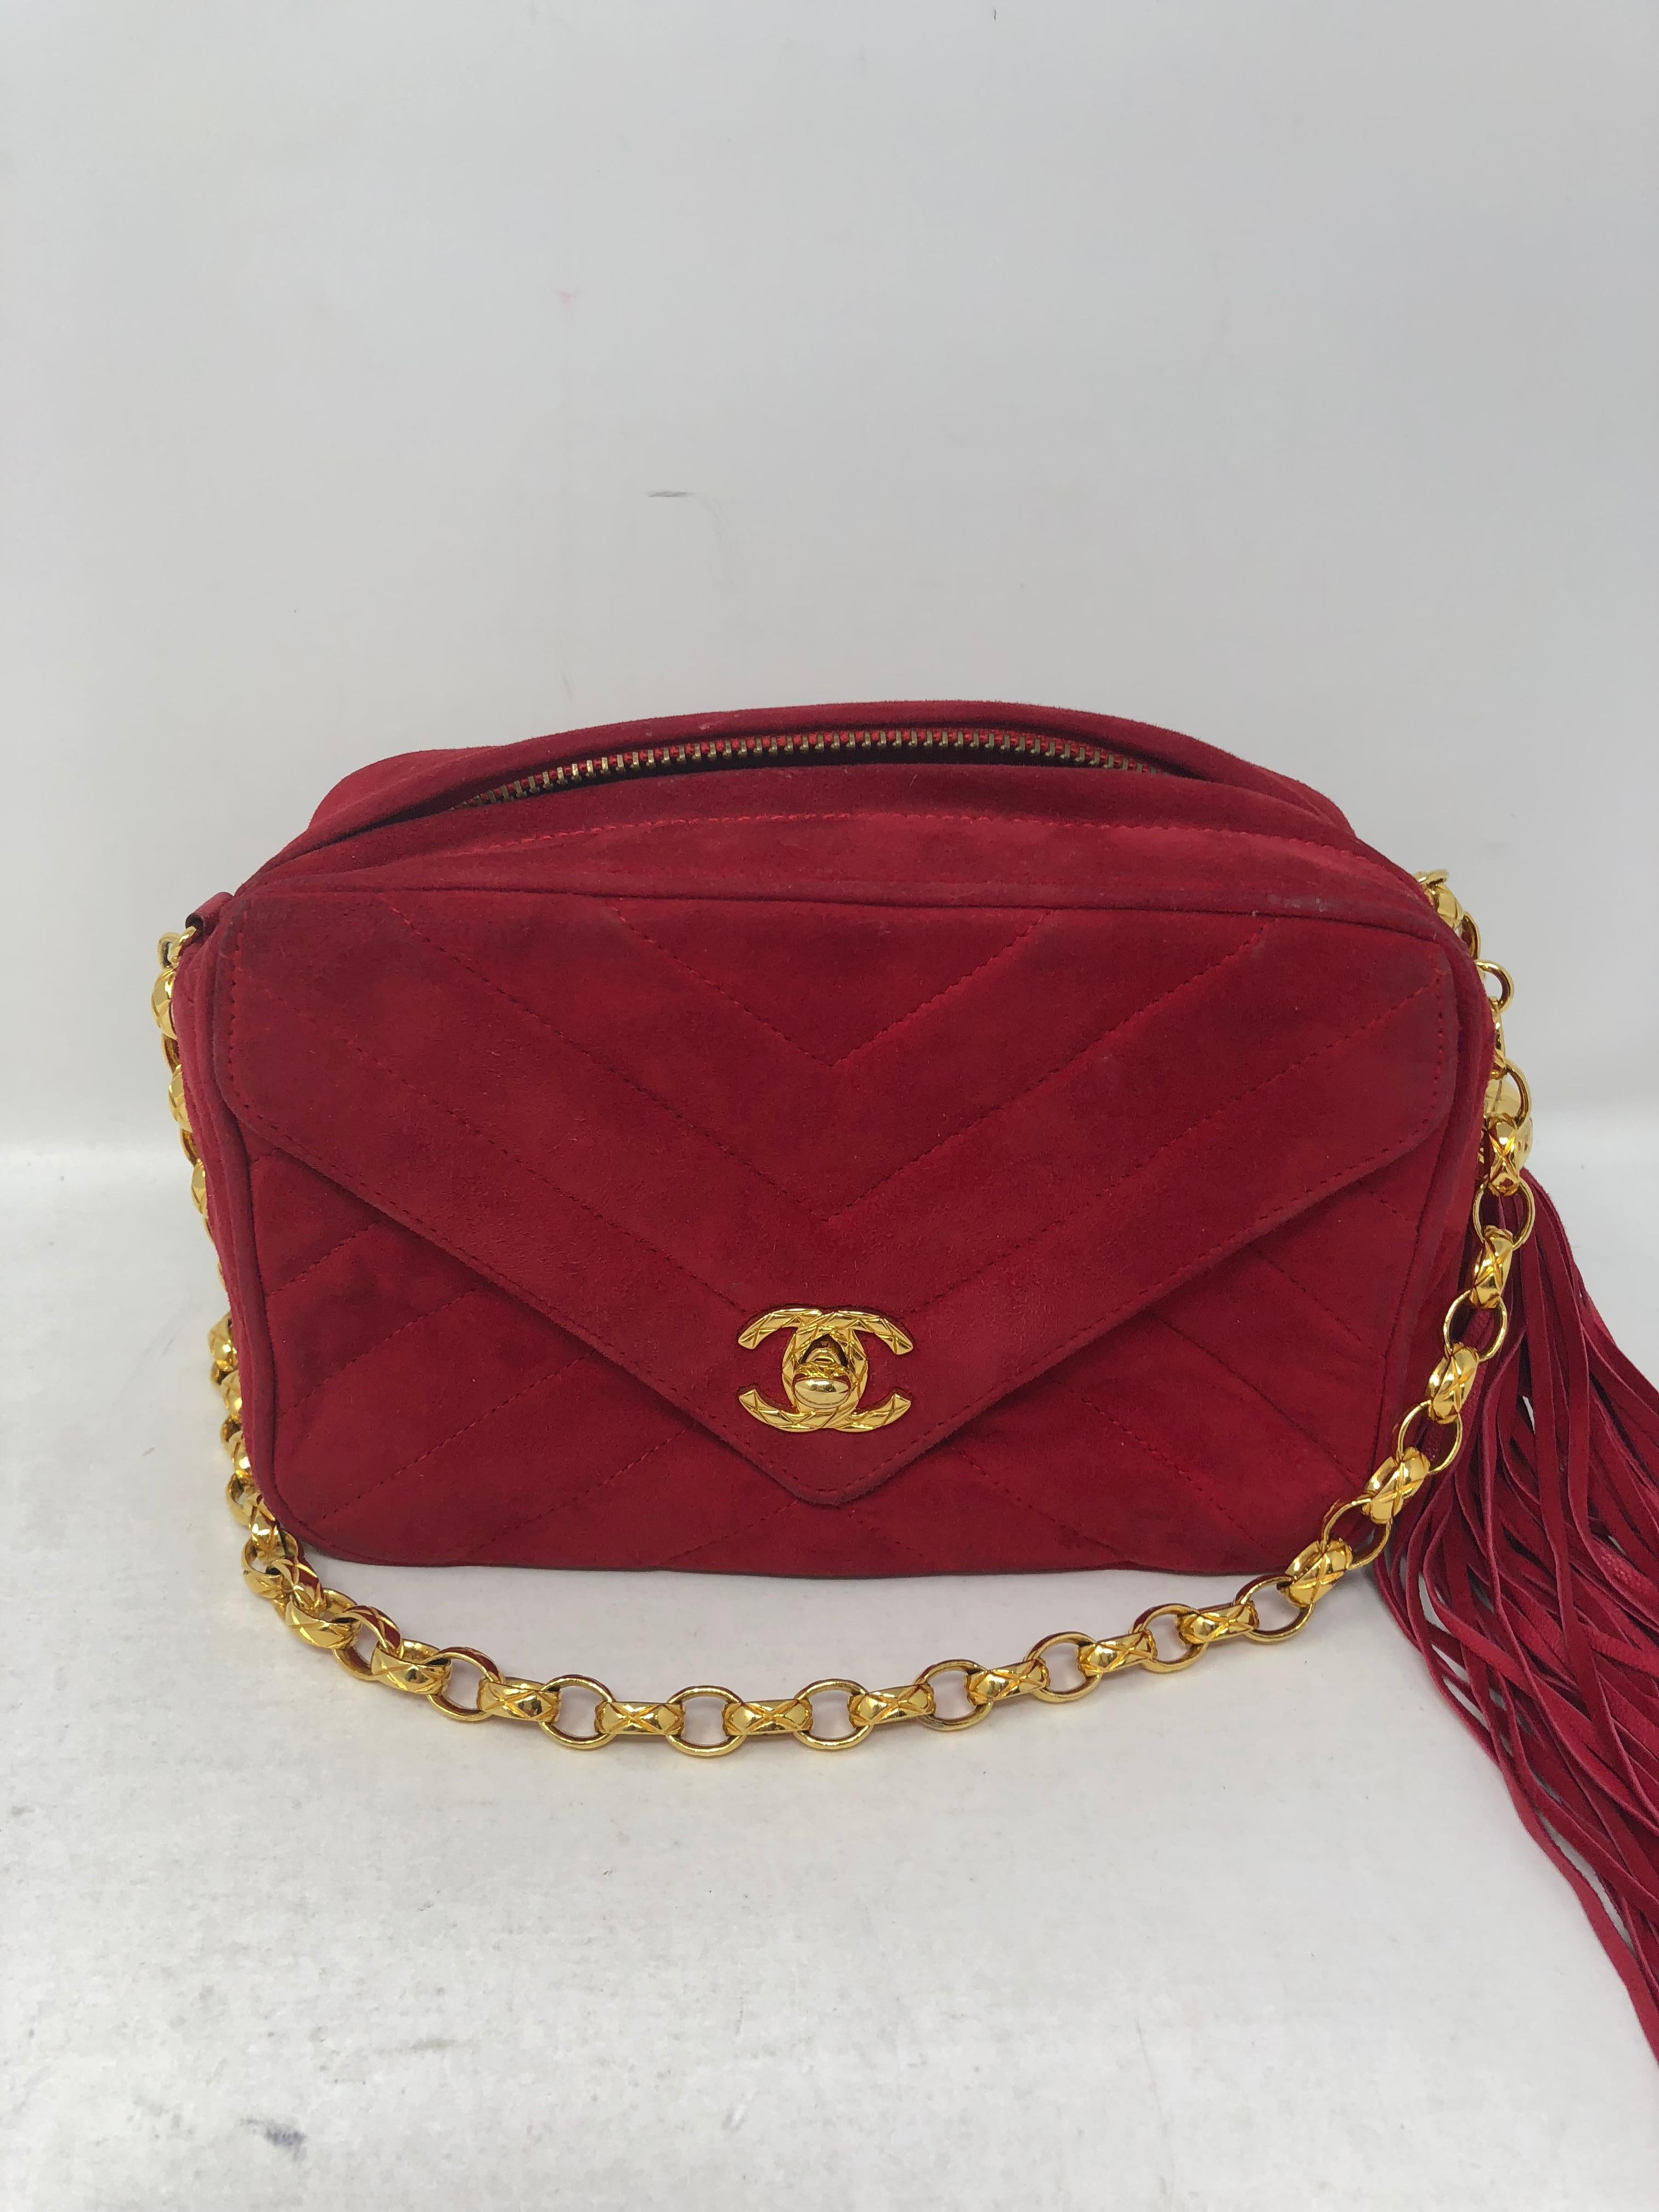 Chanel Red Suede Bag with Fringe  2